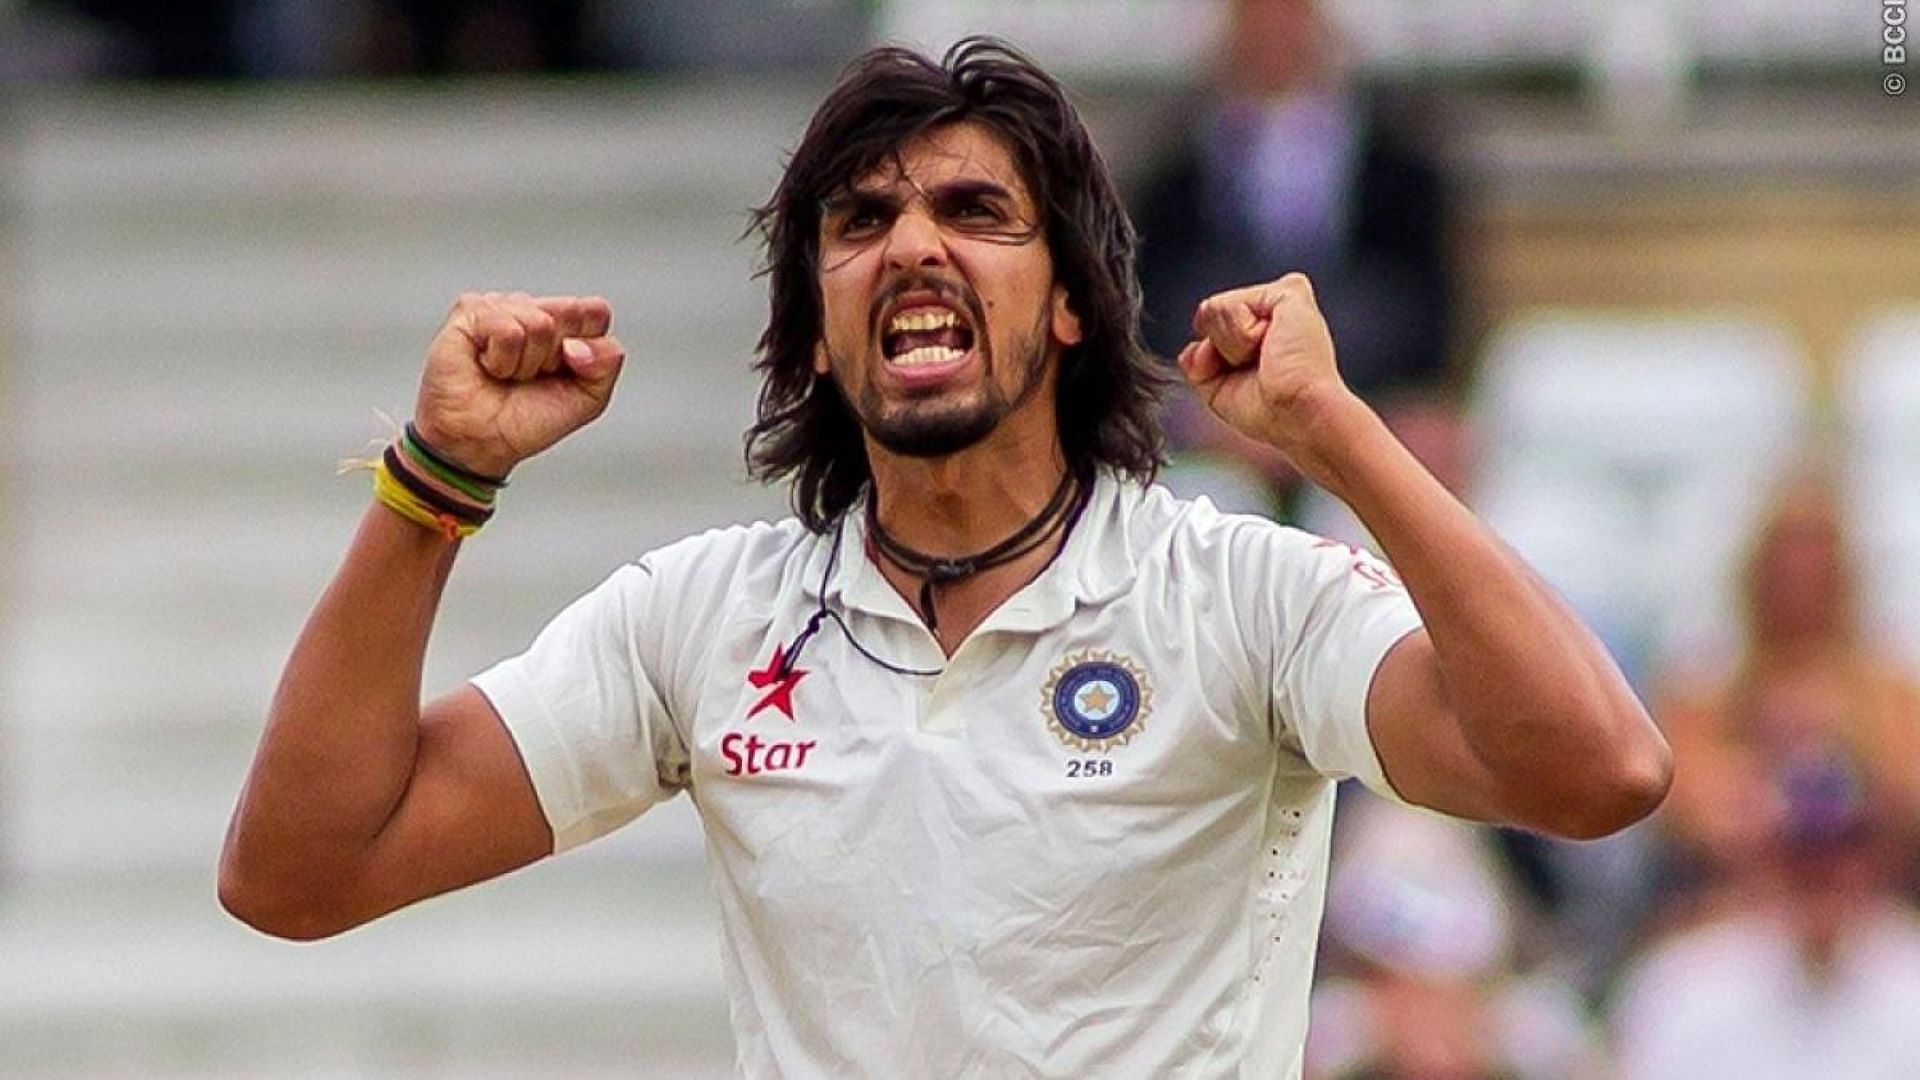 Ishant Sharma produced his career best Test figures in the second innings of the match